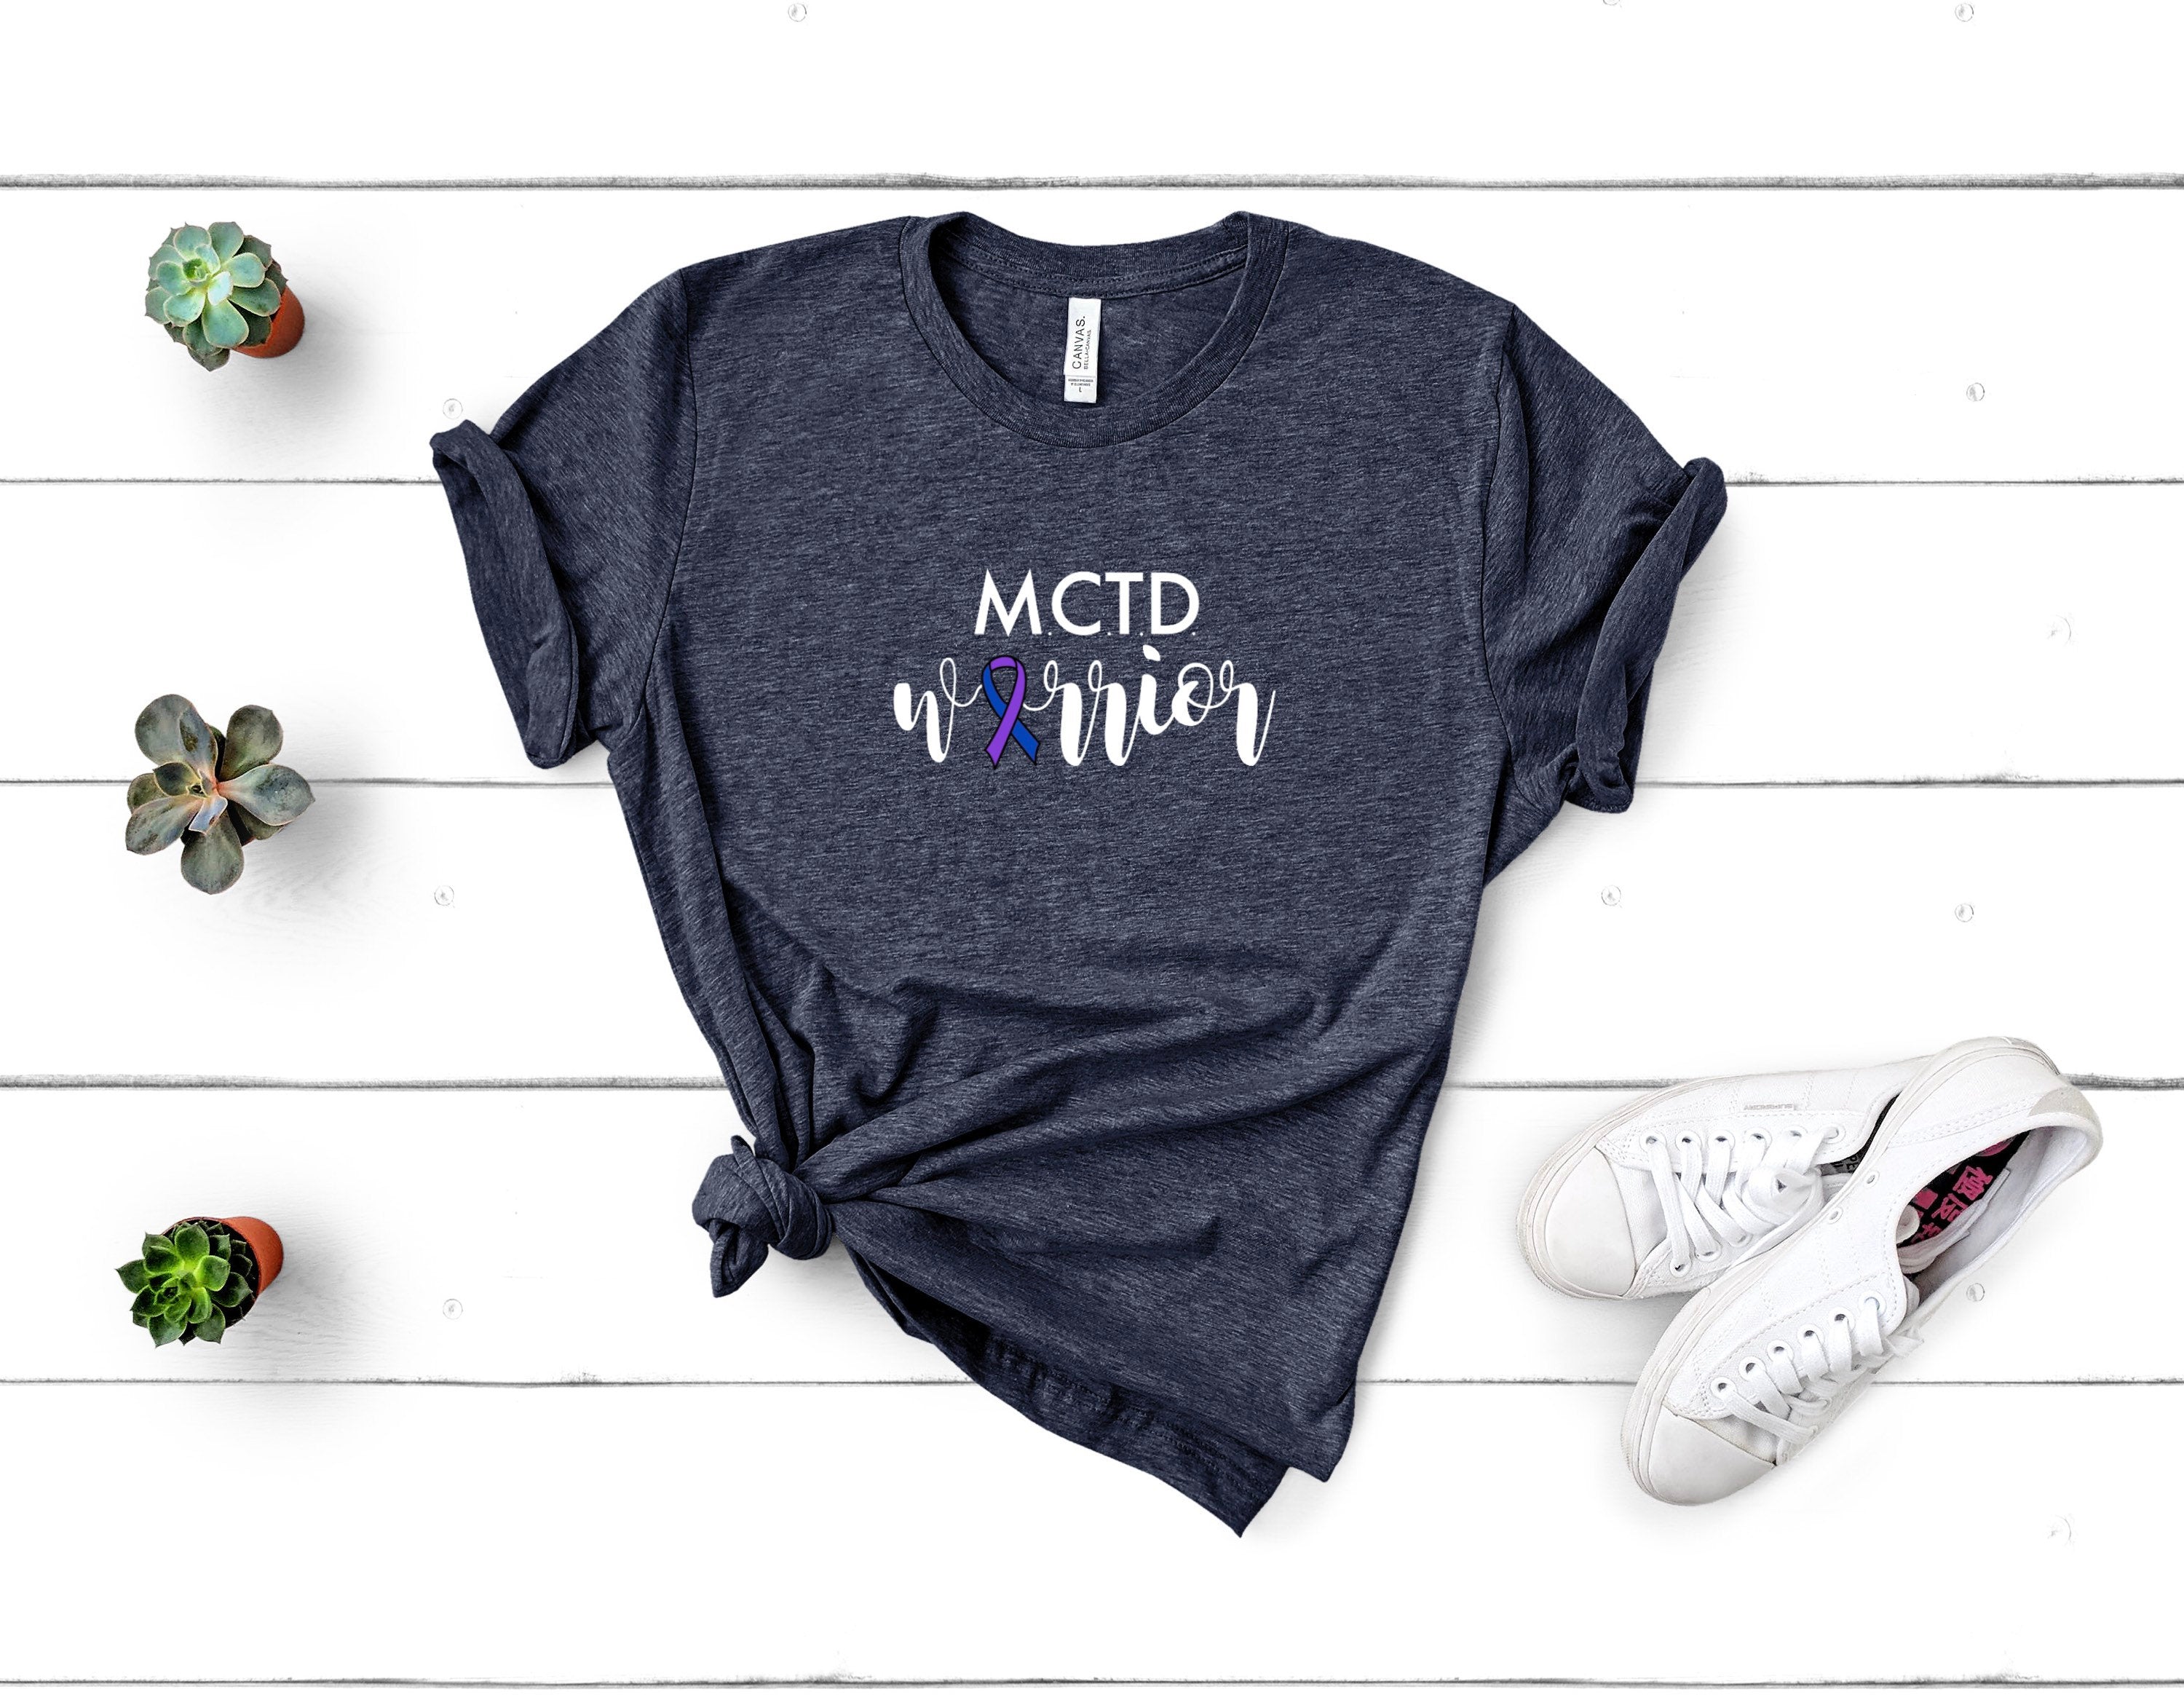 MCTD Warrior T-Shirt, mixed connective tissue disease